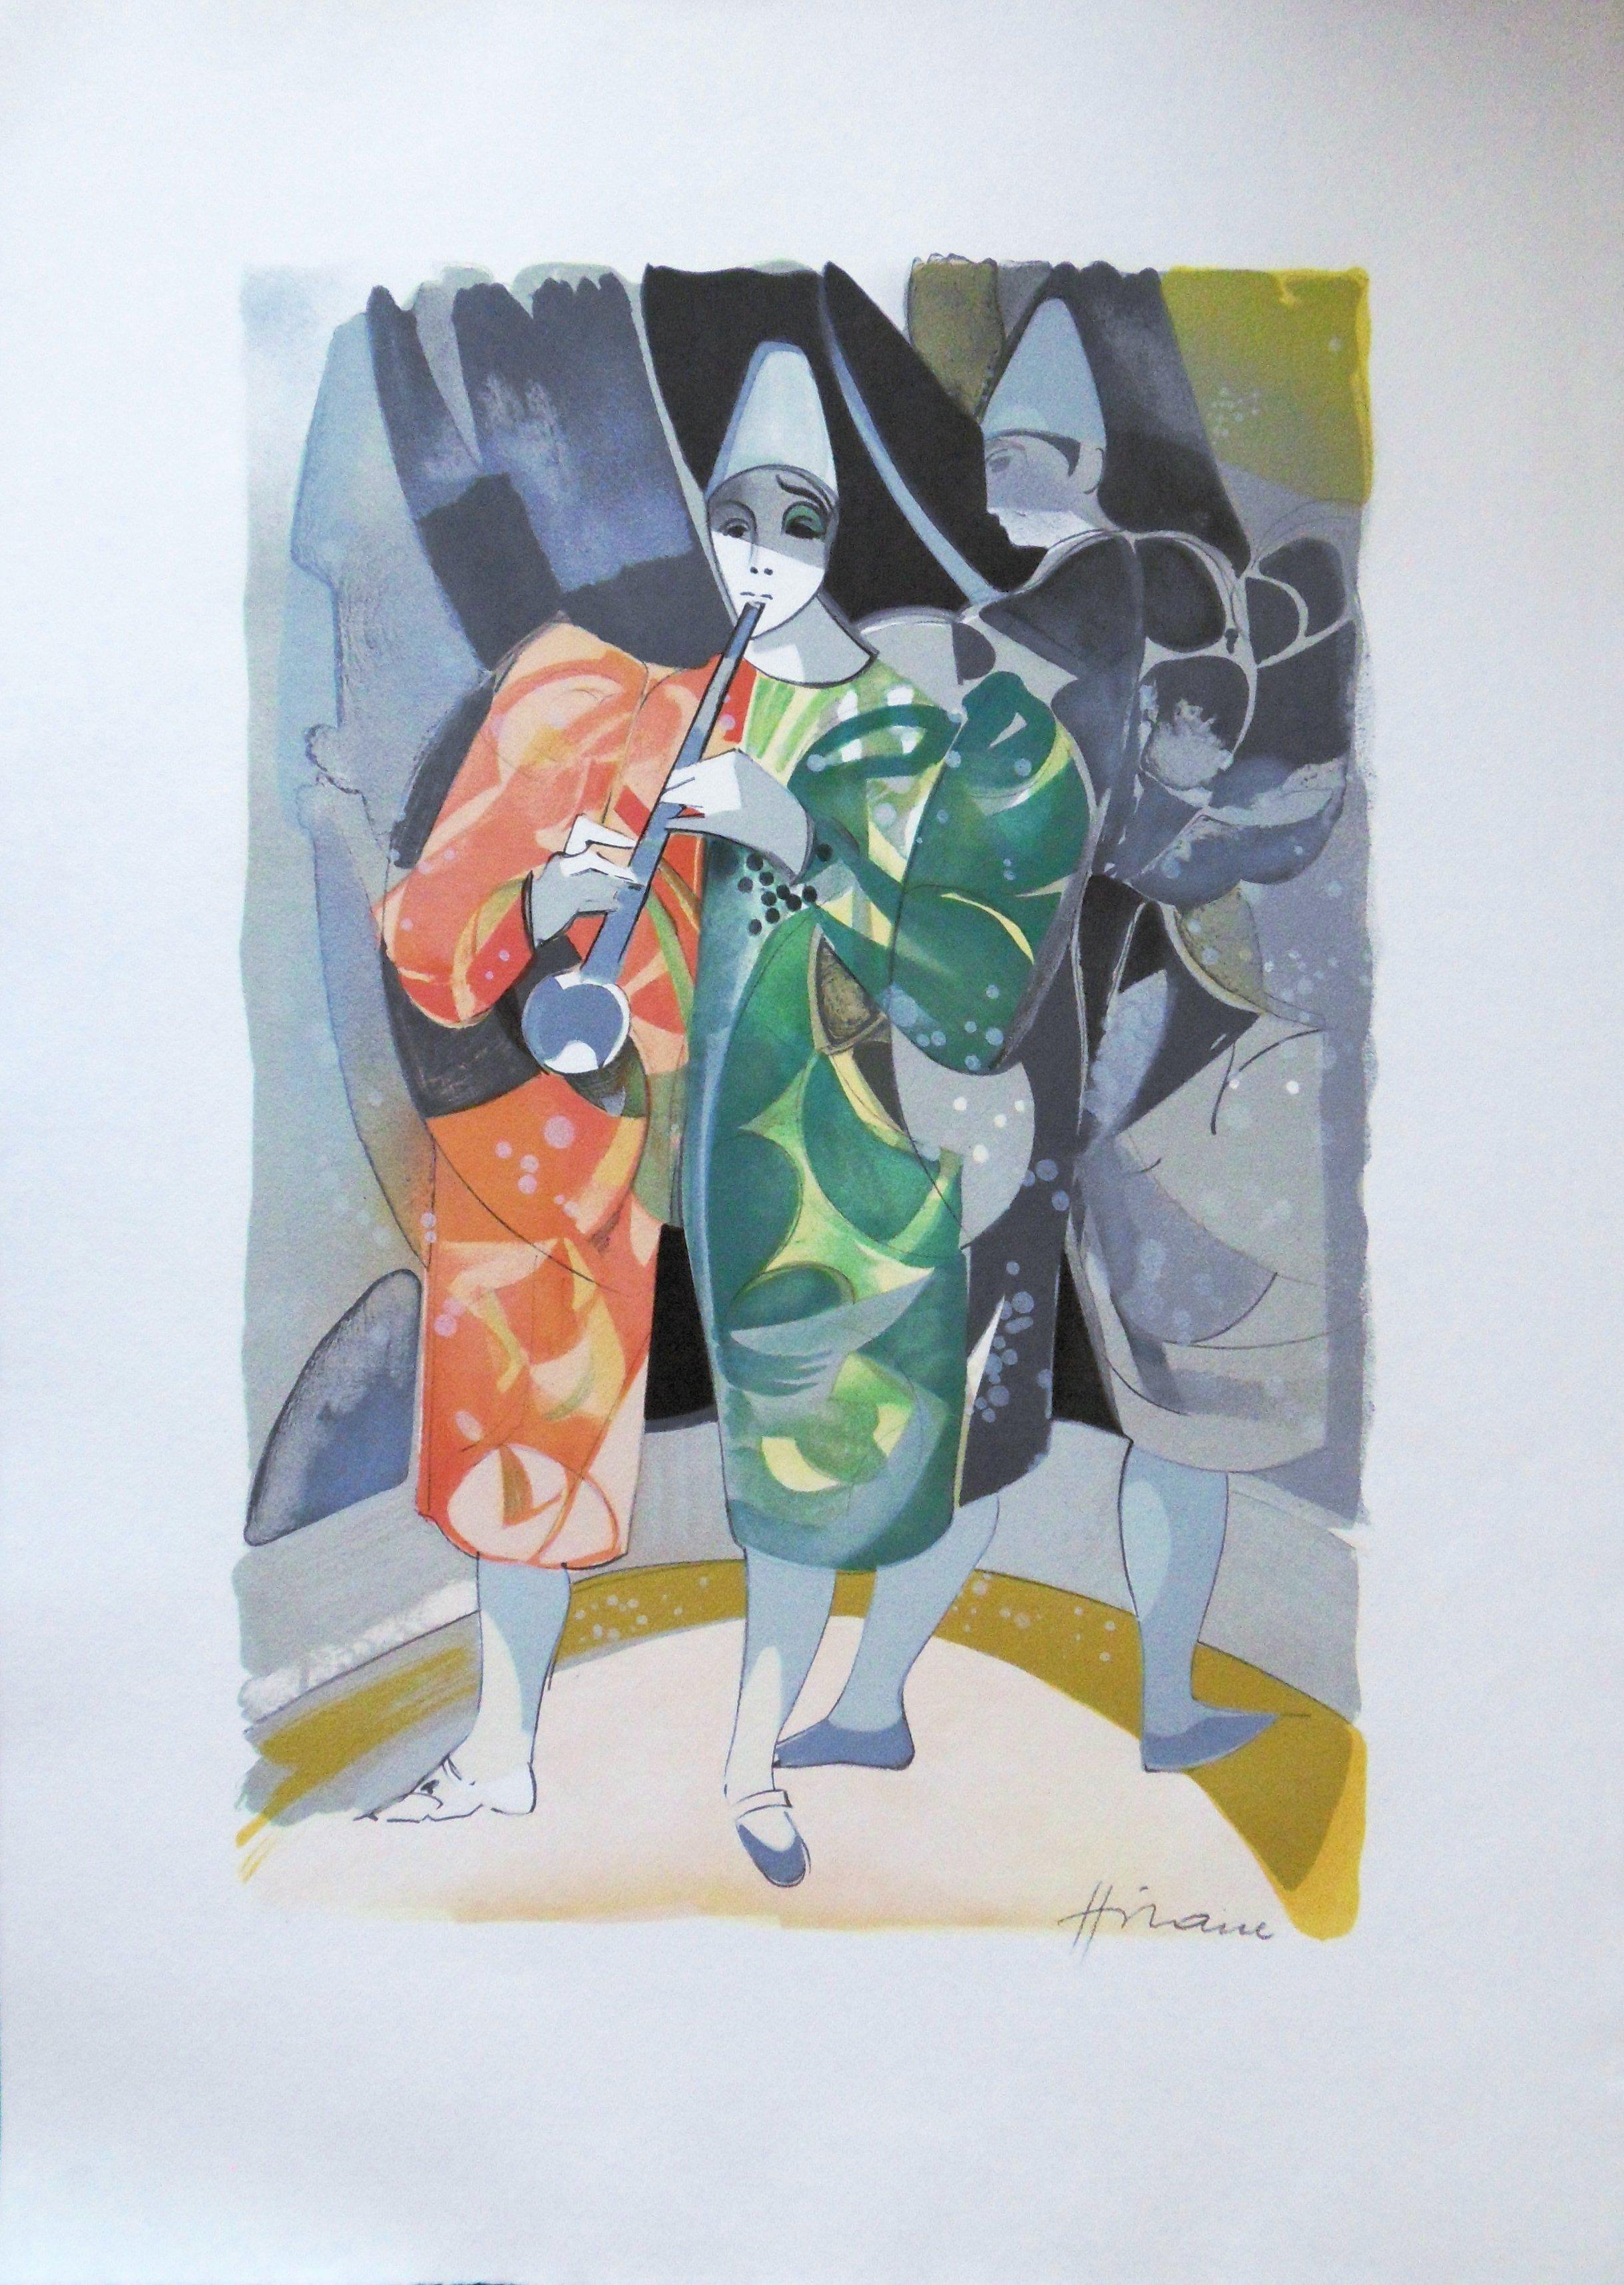 Camille Hilaire Figurative Print - Circus : The Musician Clown - Original handsigned lithograph